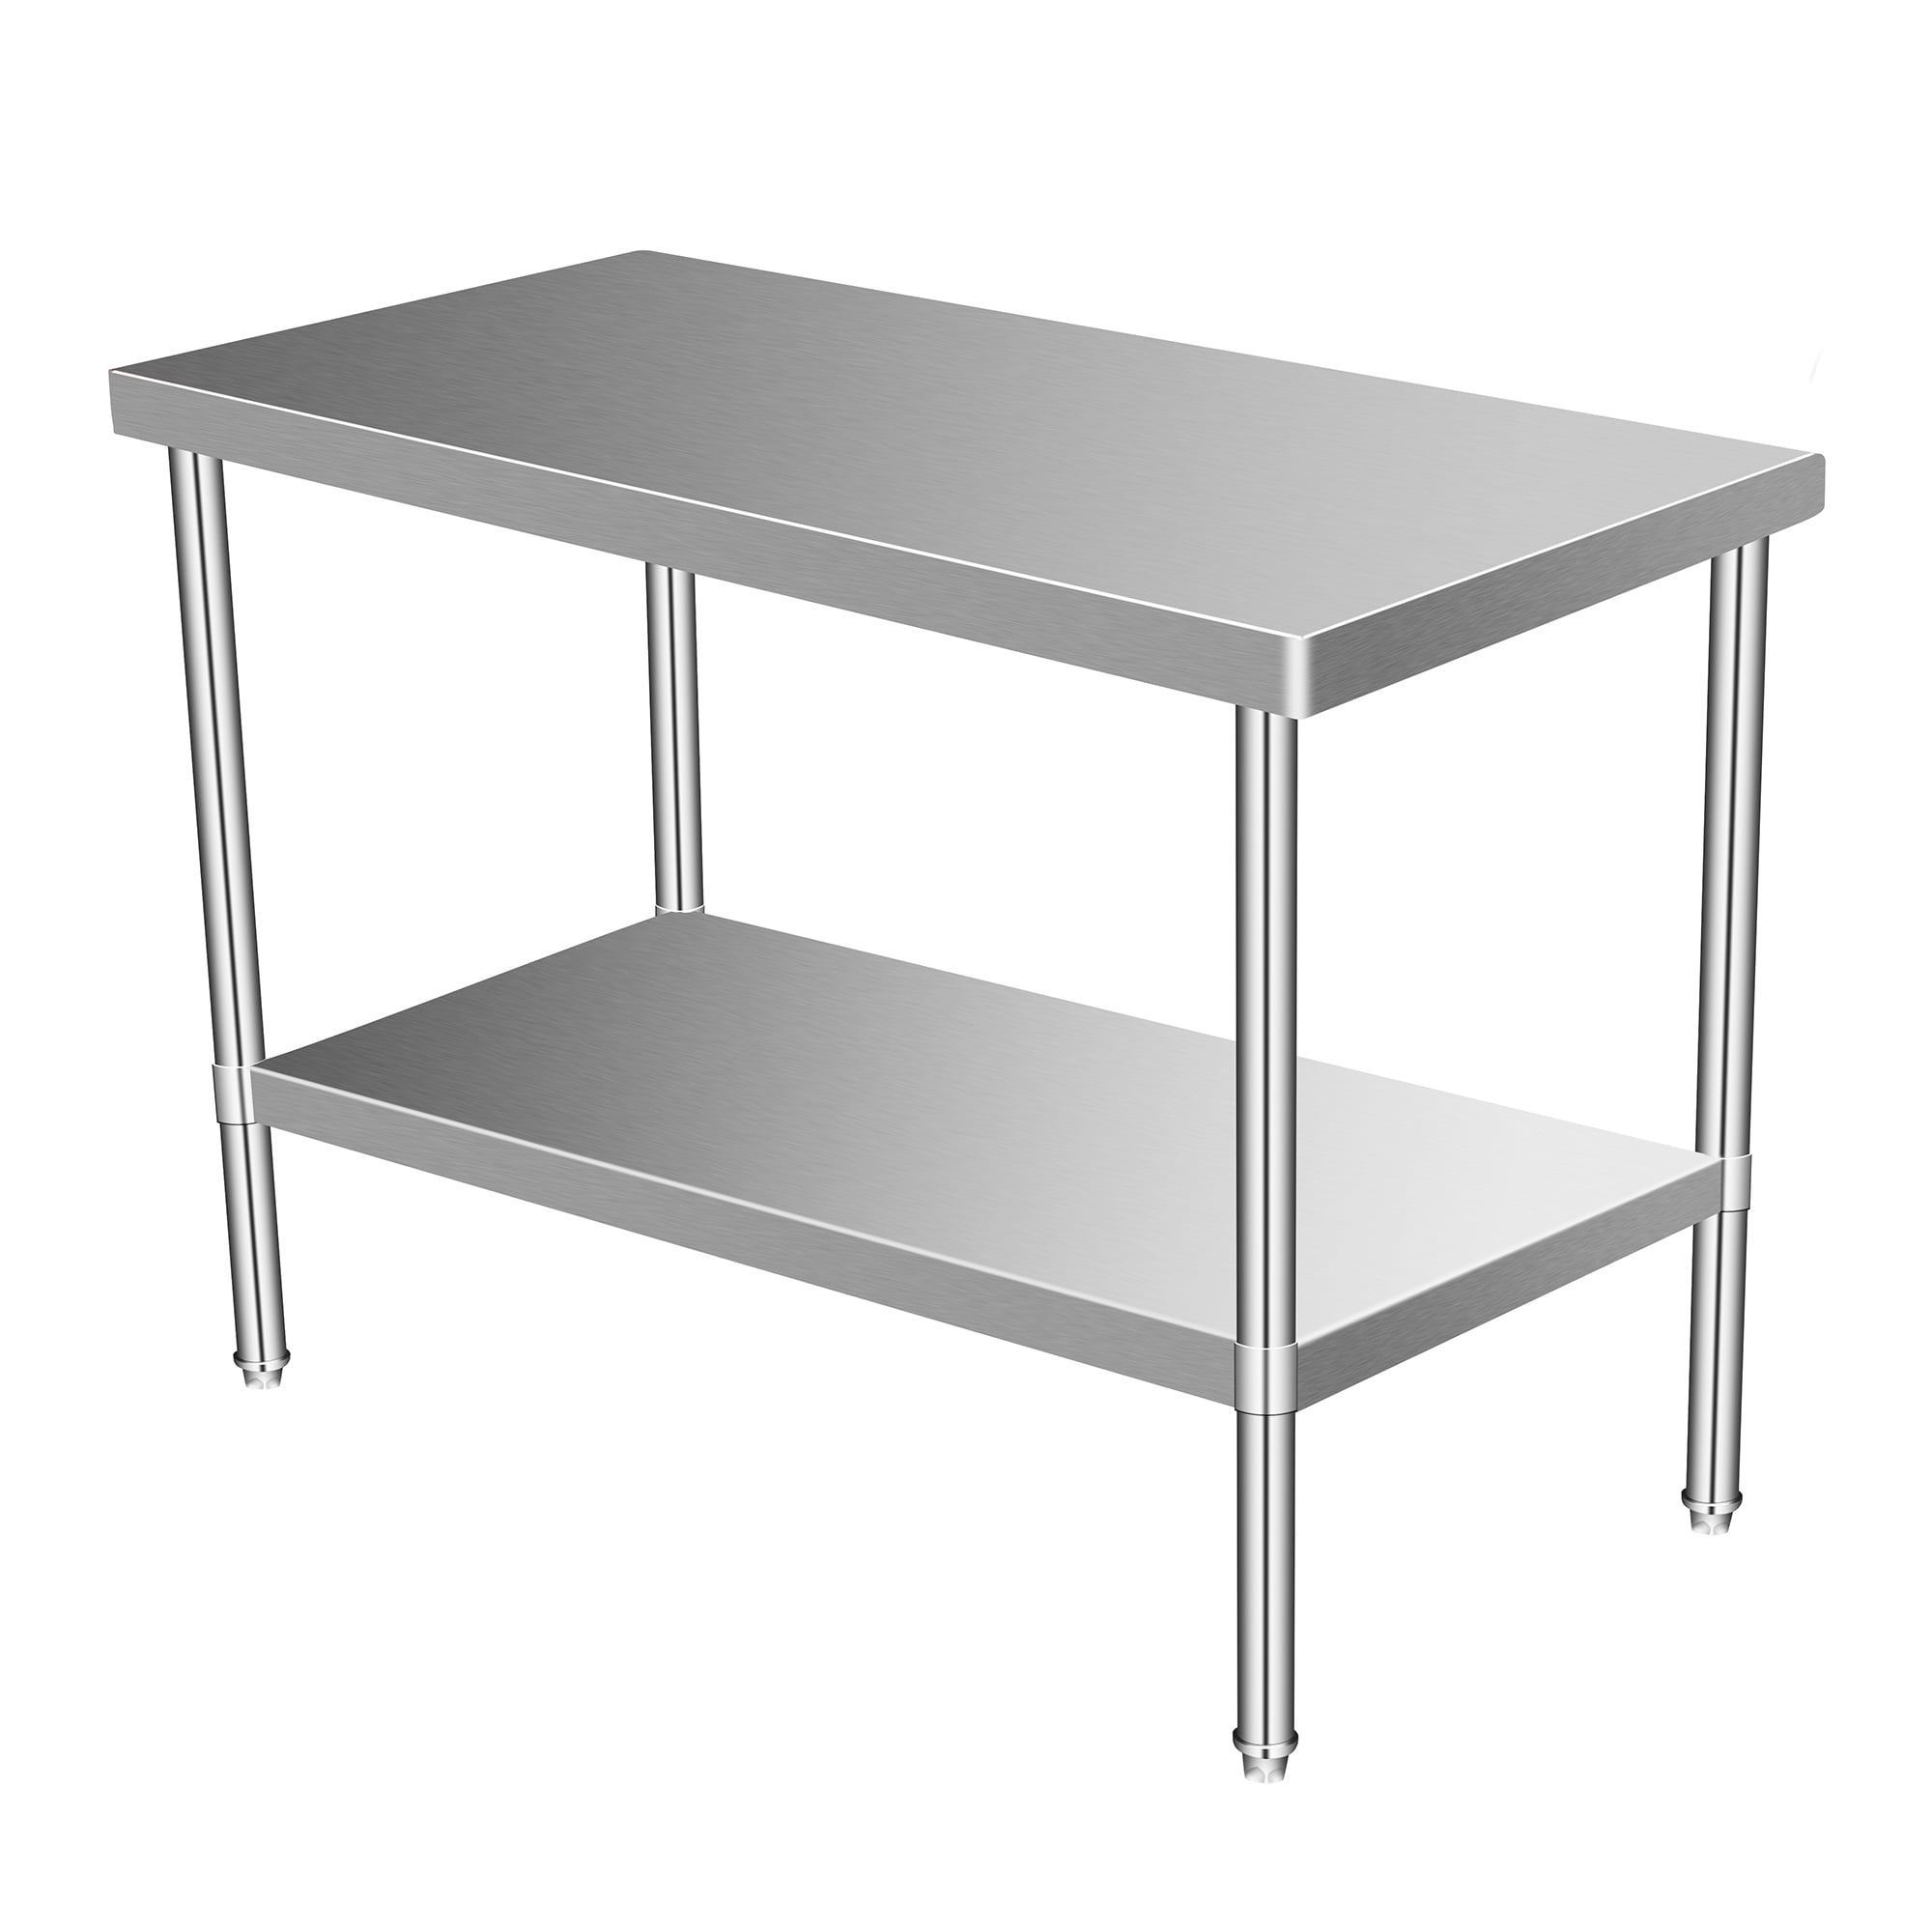 24" x 36" Stainless Steel Commercial Kitchen Work Food Prep Table OPEN BOX 